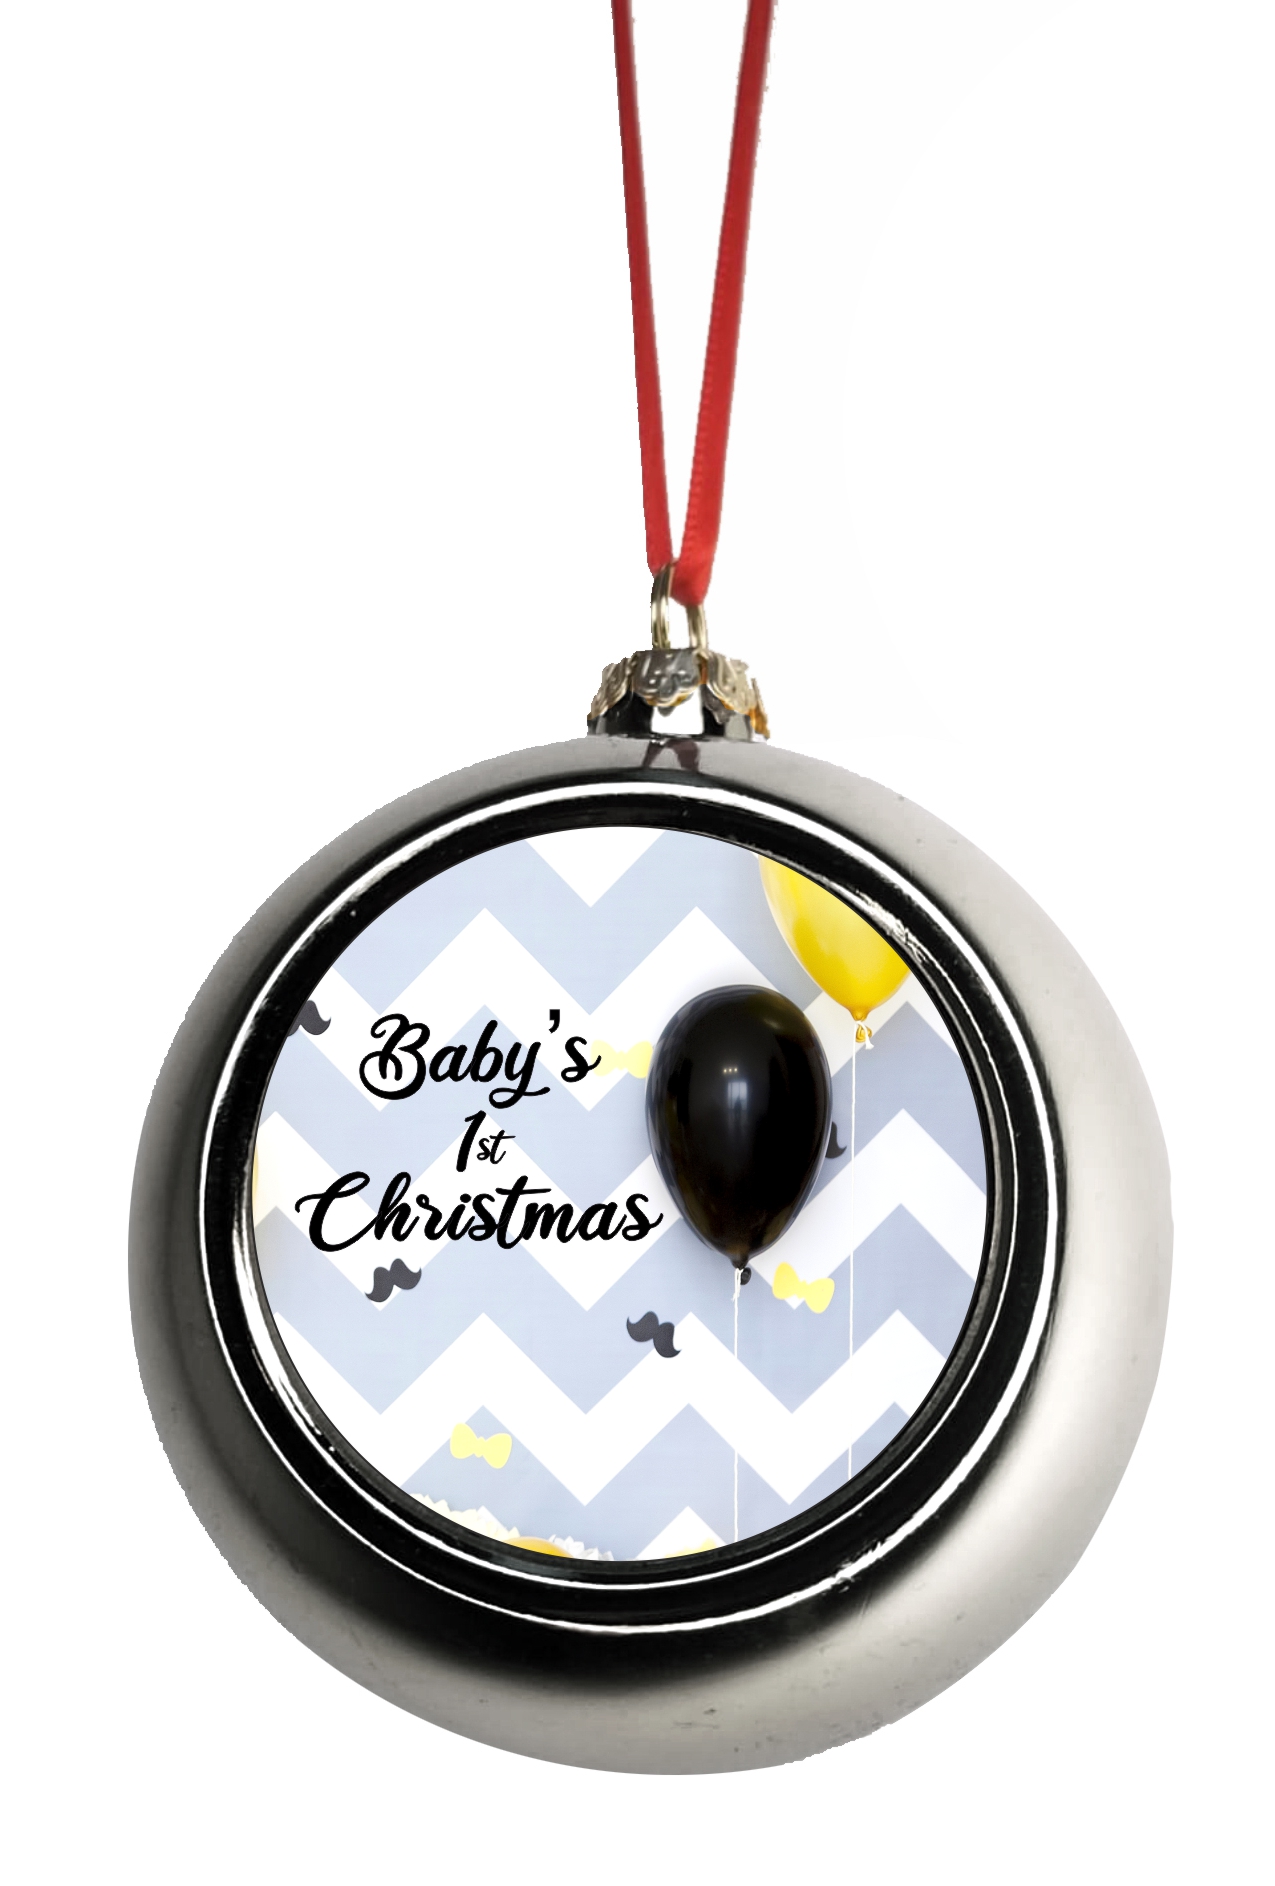 Babys First Christmas Xmas Ornament New Baby First Year Ornament  - Baby 1st Xmas Ornament - Baby 1st Christmas Ornament Christmas DÃ©cor Silver Ball Ornaments - image 1 of 1